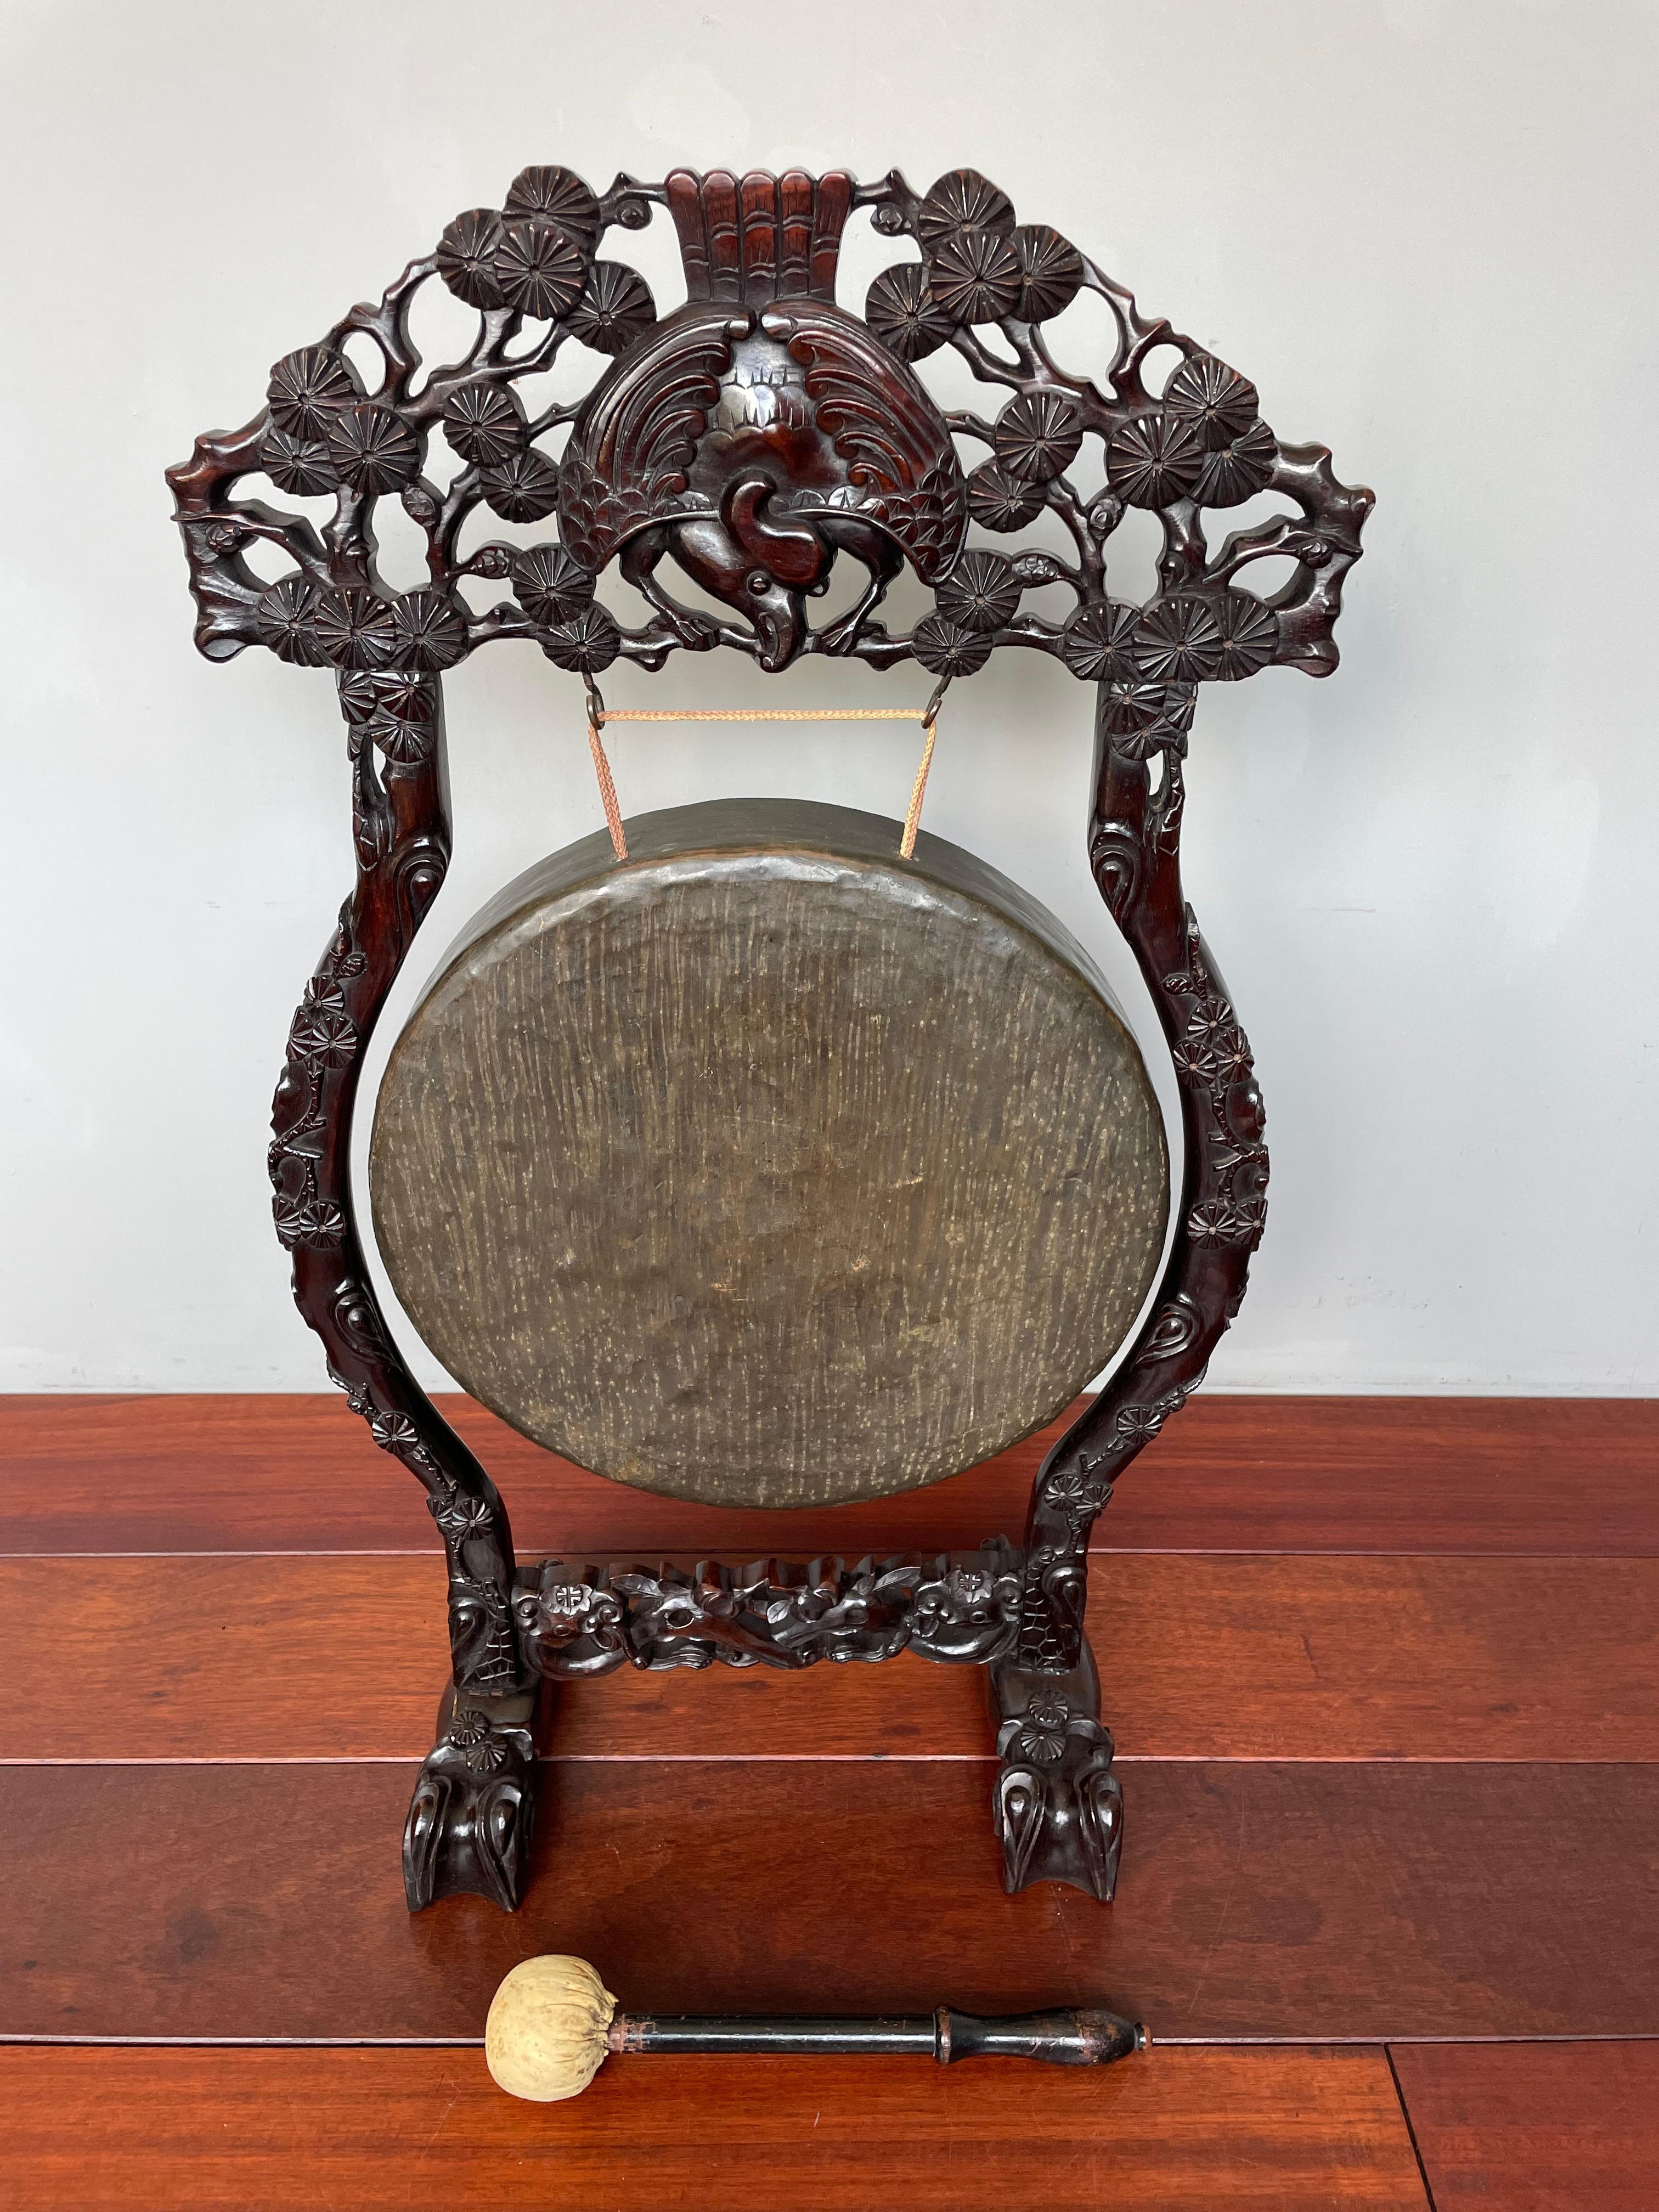 Rare, striking (no pun intended) and top quality workmanship, antique Chinese gong with hammer.

This hand-crafted Chinese gong from the early 1900s is both practical to use and beautiful to look at. The large bronze gong itself is wonderfully